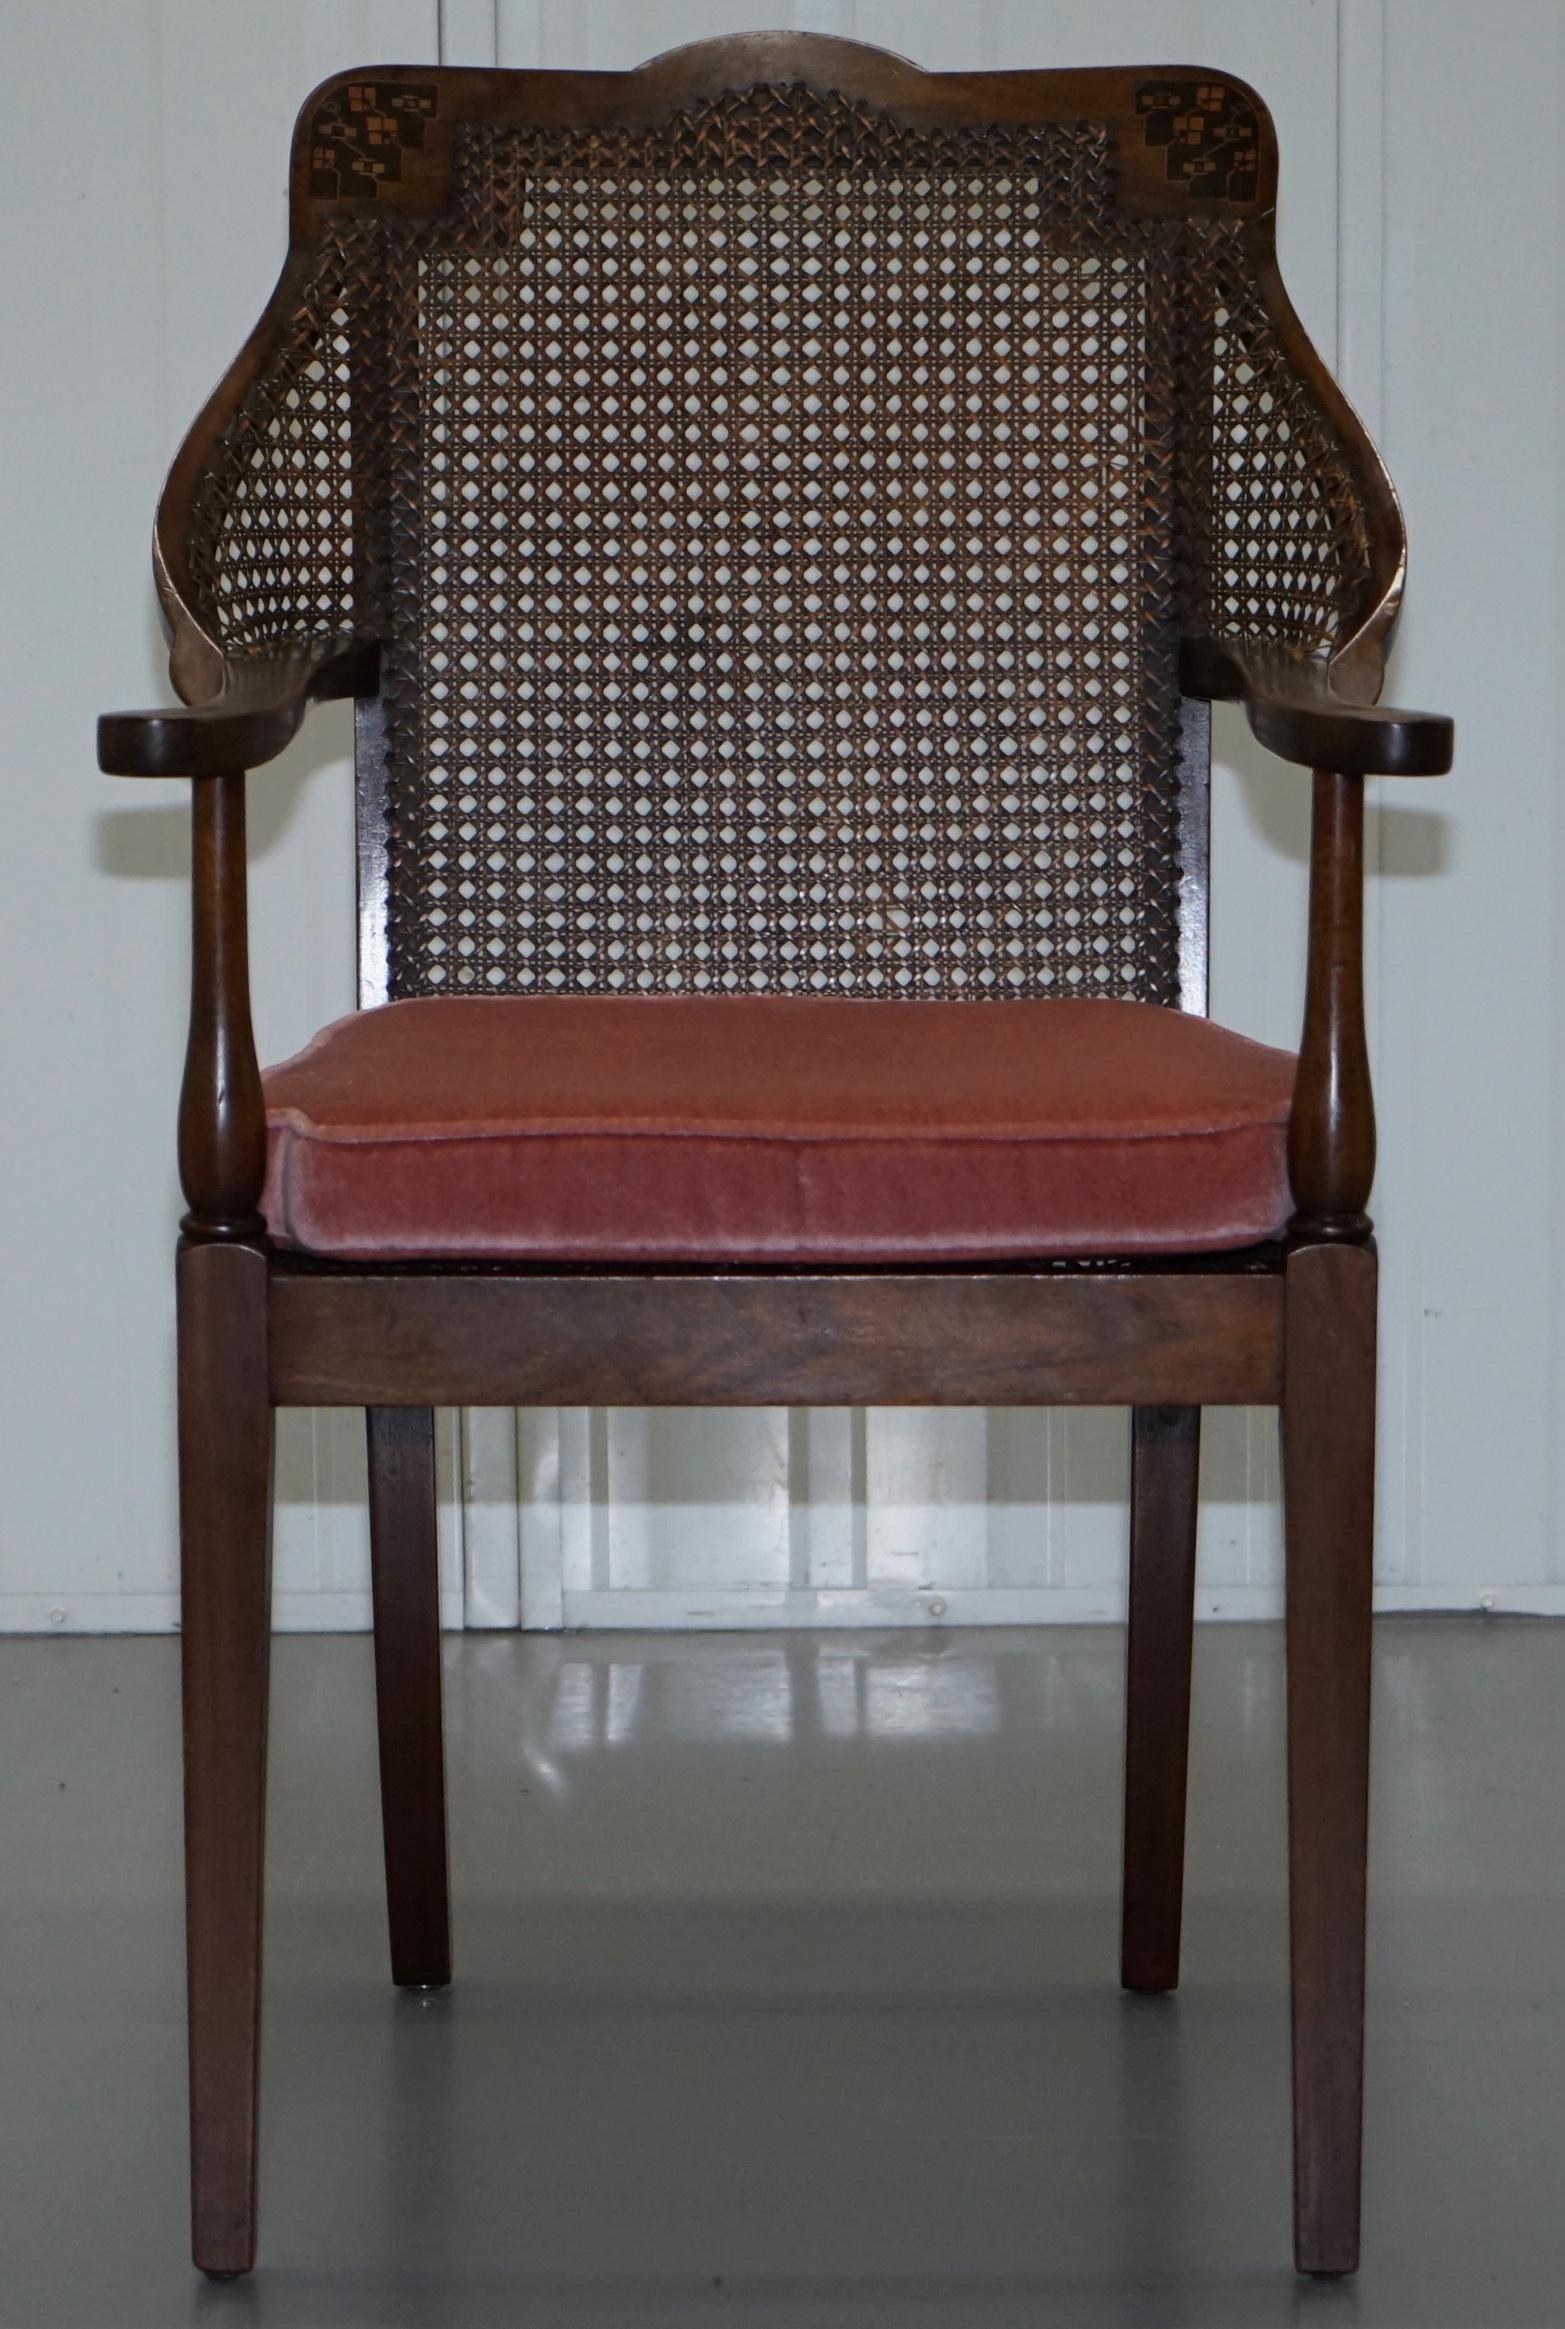 We are delighted to offer for sale this lovely Edwardian Mahogany and rattan armchair with velour seat cushion

A good looking well made and decorative armchair, it is very comfortable and sculptural to look at

Condition wise the seat base